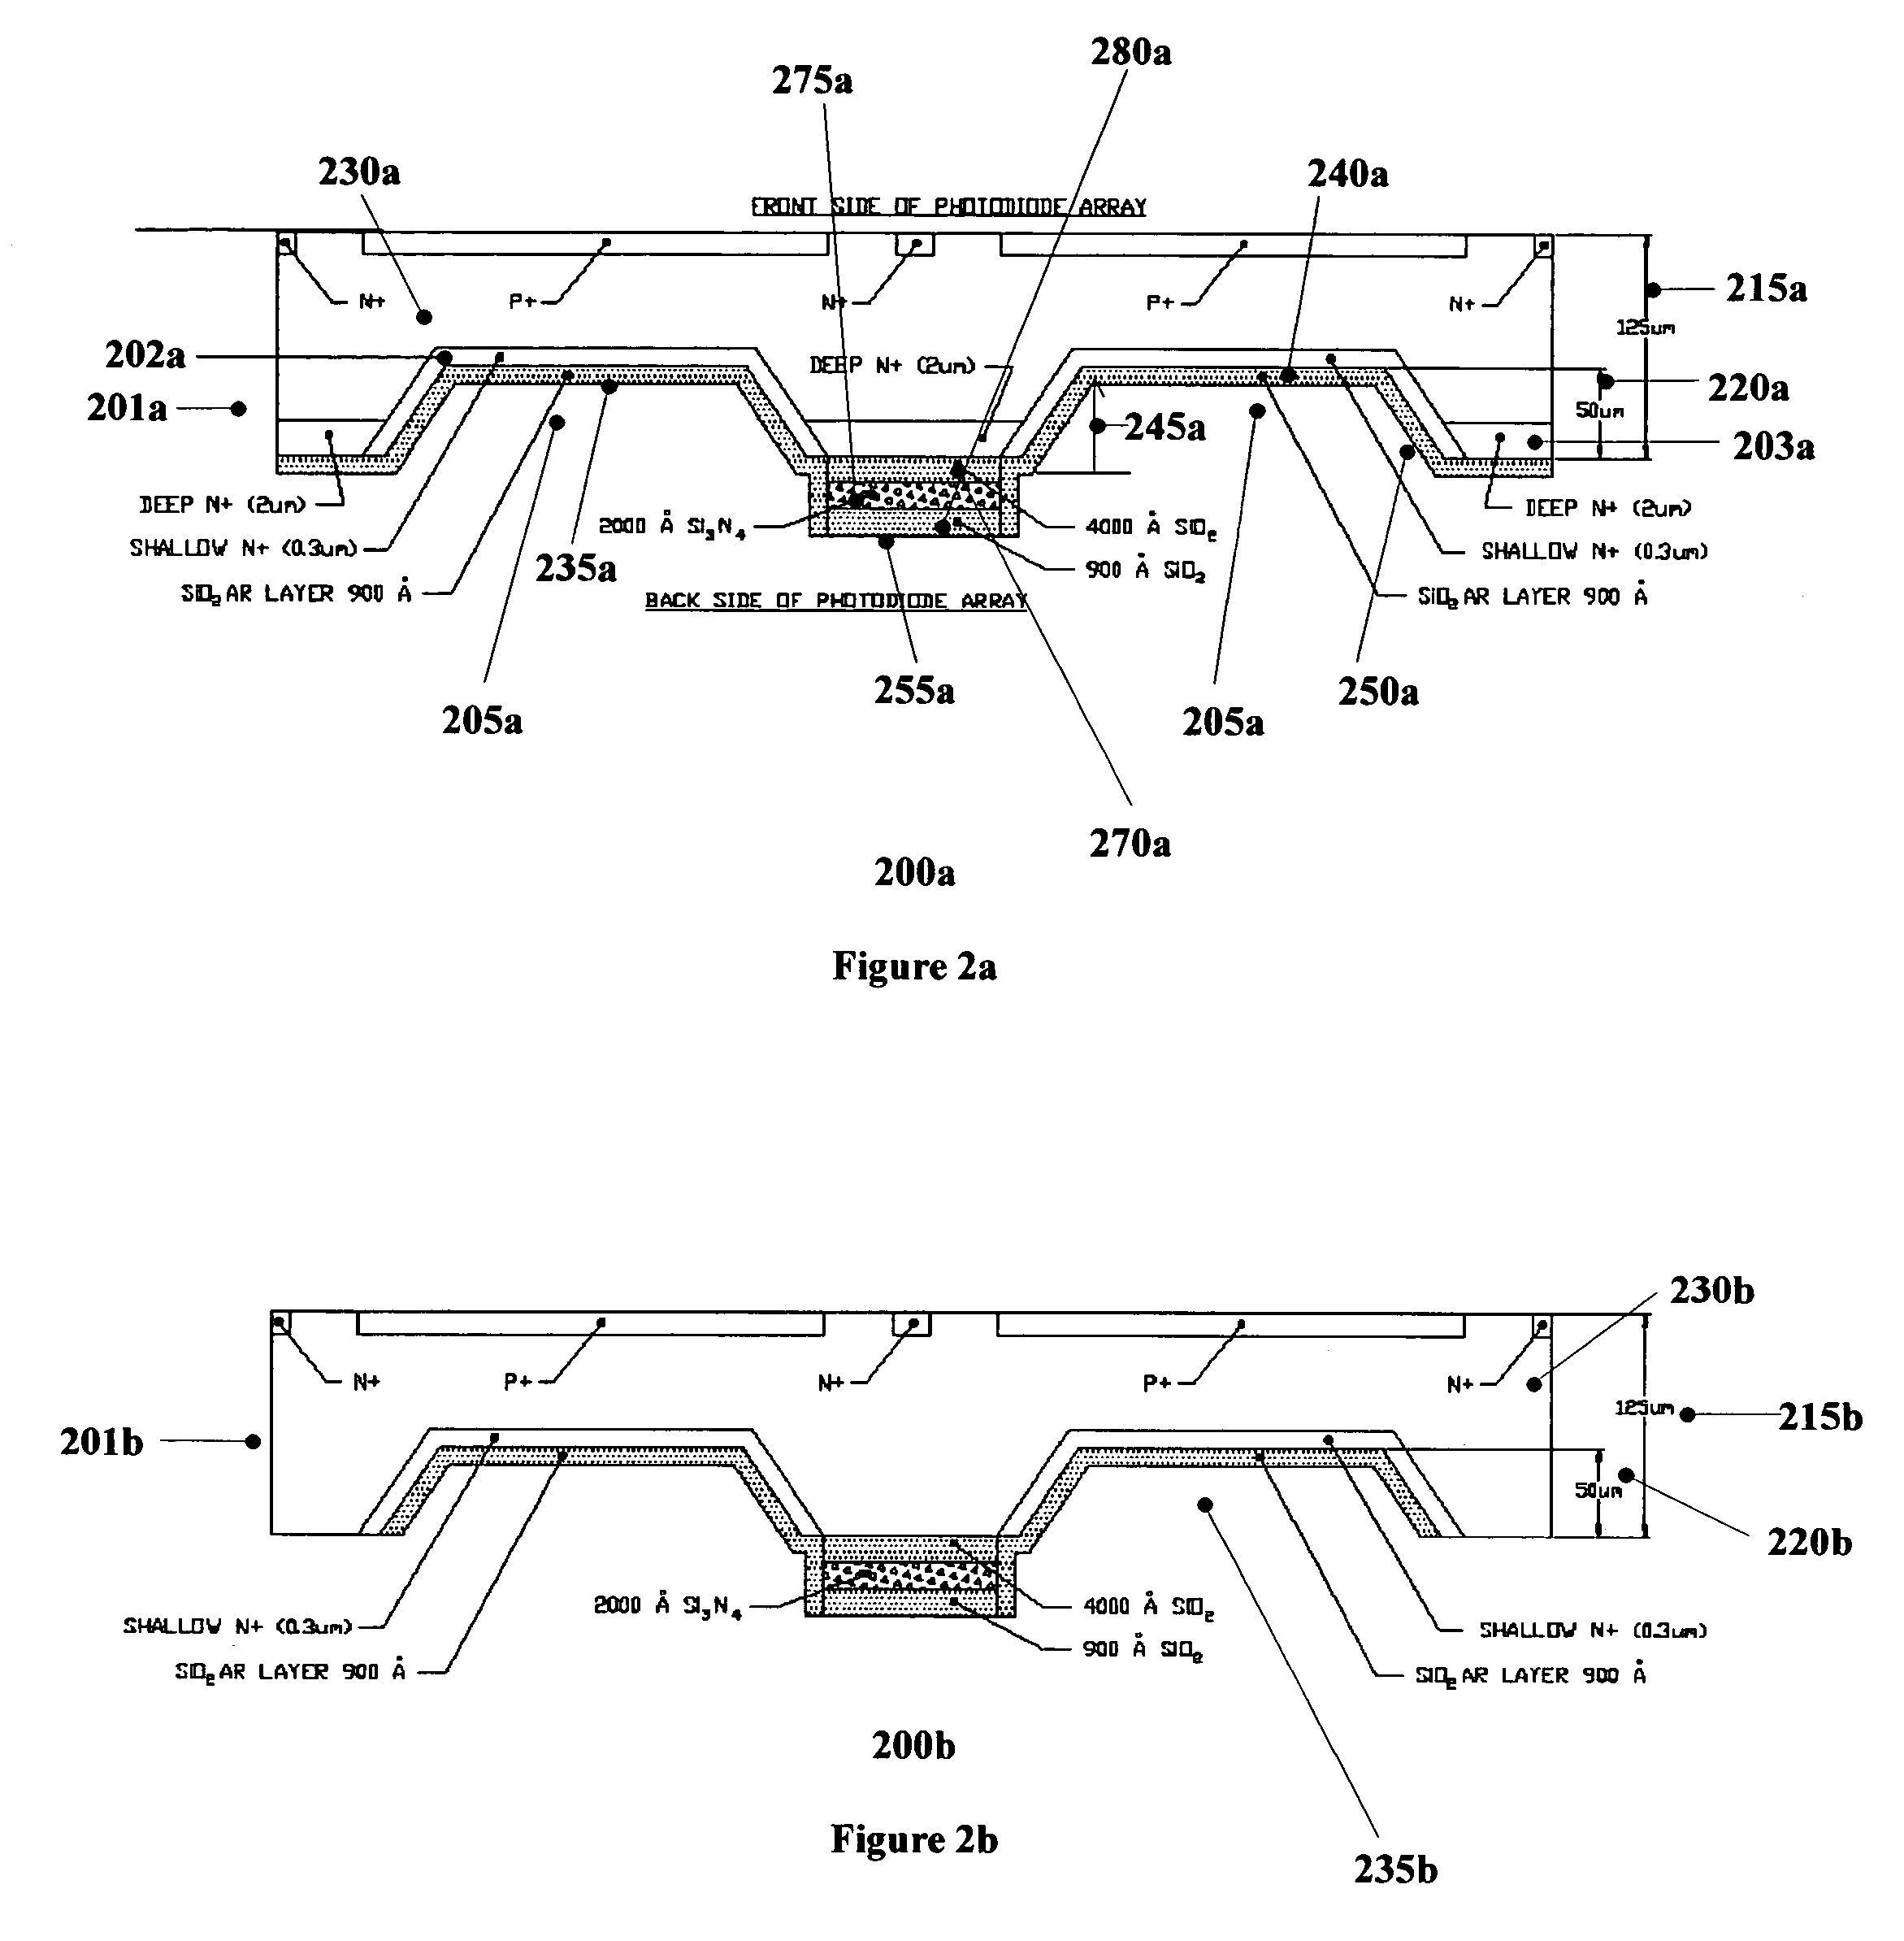 Thin wafer detectors with improved radiation damage and crosstalk characteristics